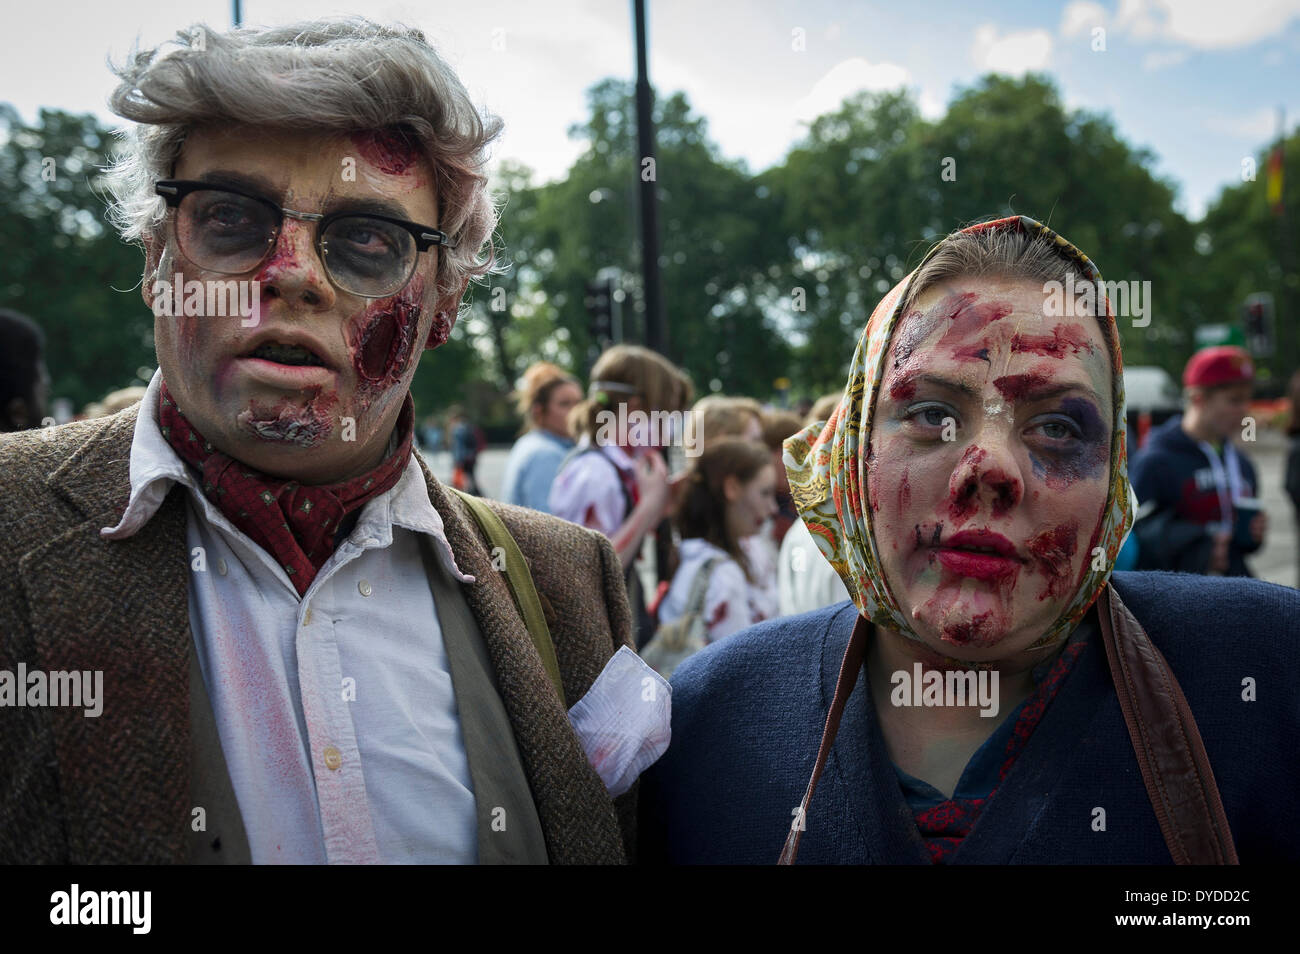 Participants in the annual Zombie Invasion of London raising money for St Mungo's homeless charity. Stock Photo